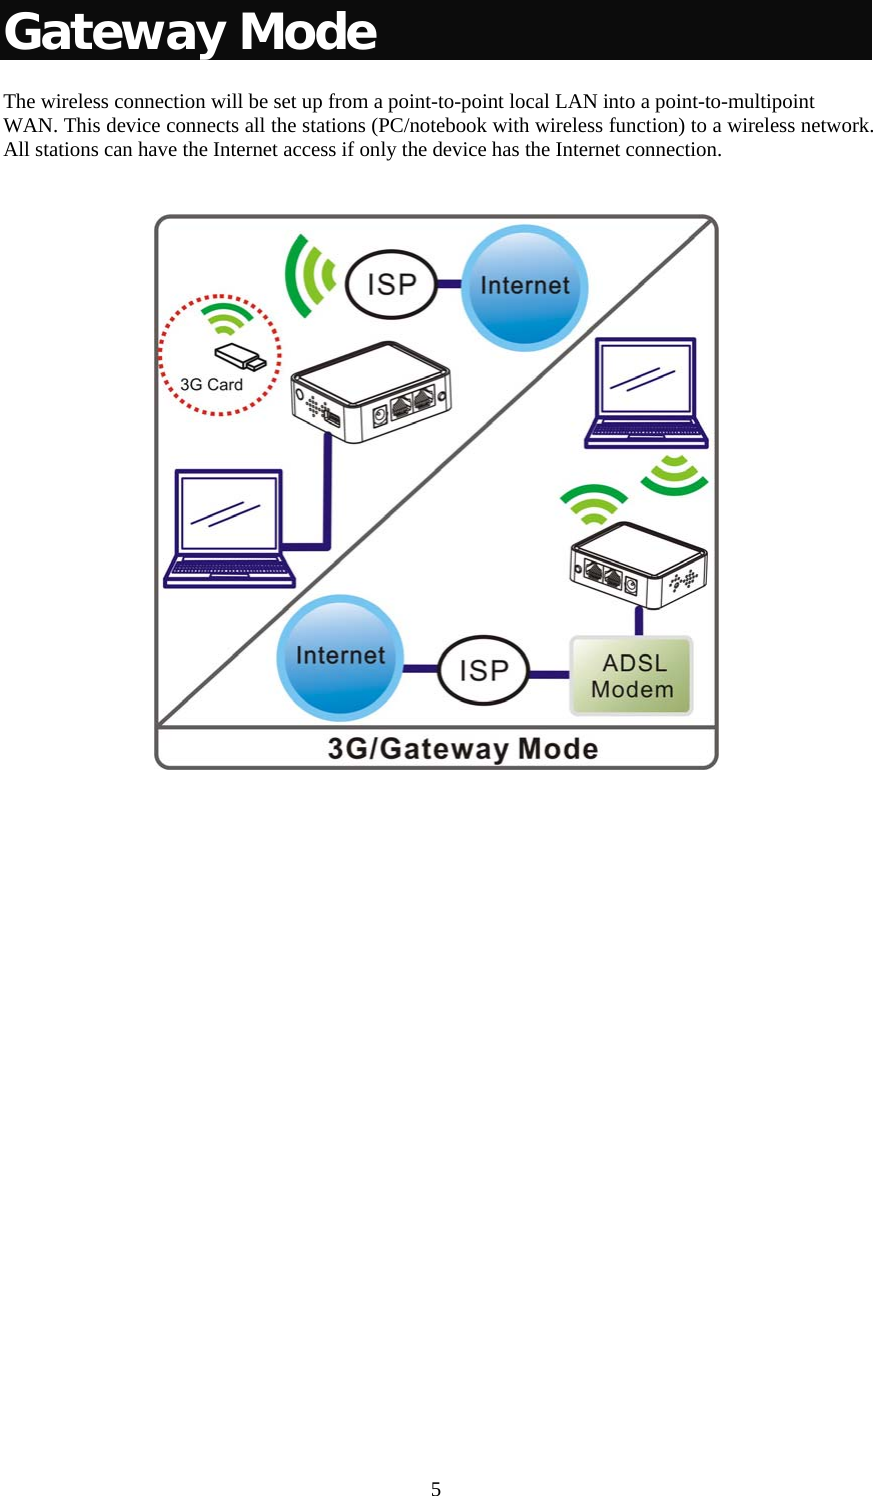   5Gateway Mode The wireless connection will be set up from a point-to-point local LAN into a point-to-multipoint WAN. This device connects all the stations (PC/notebook with wireless function) to a wireless network. All stations can have the Internet access if only the device has the Internet connection.             